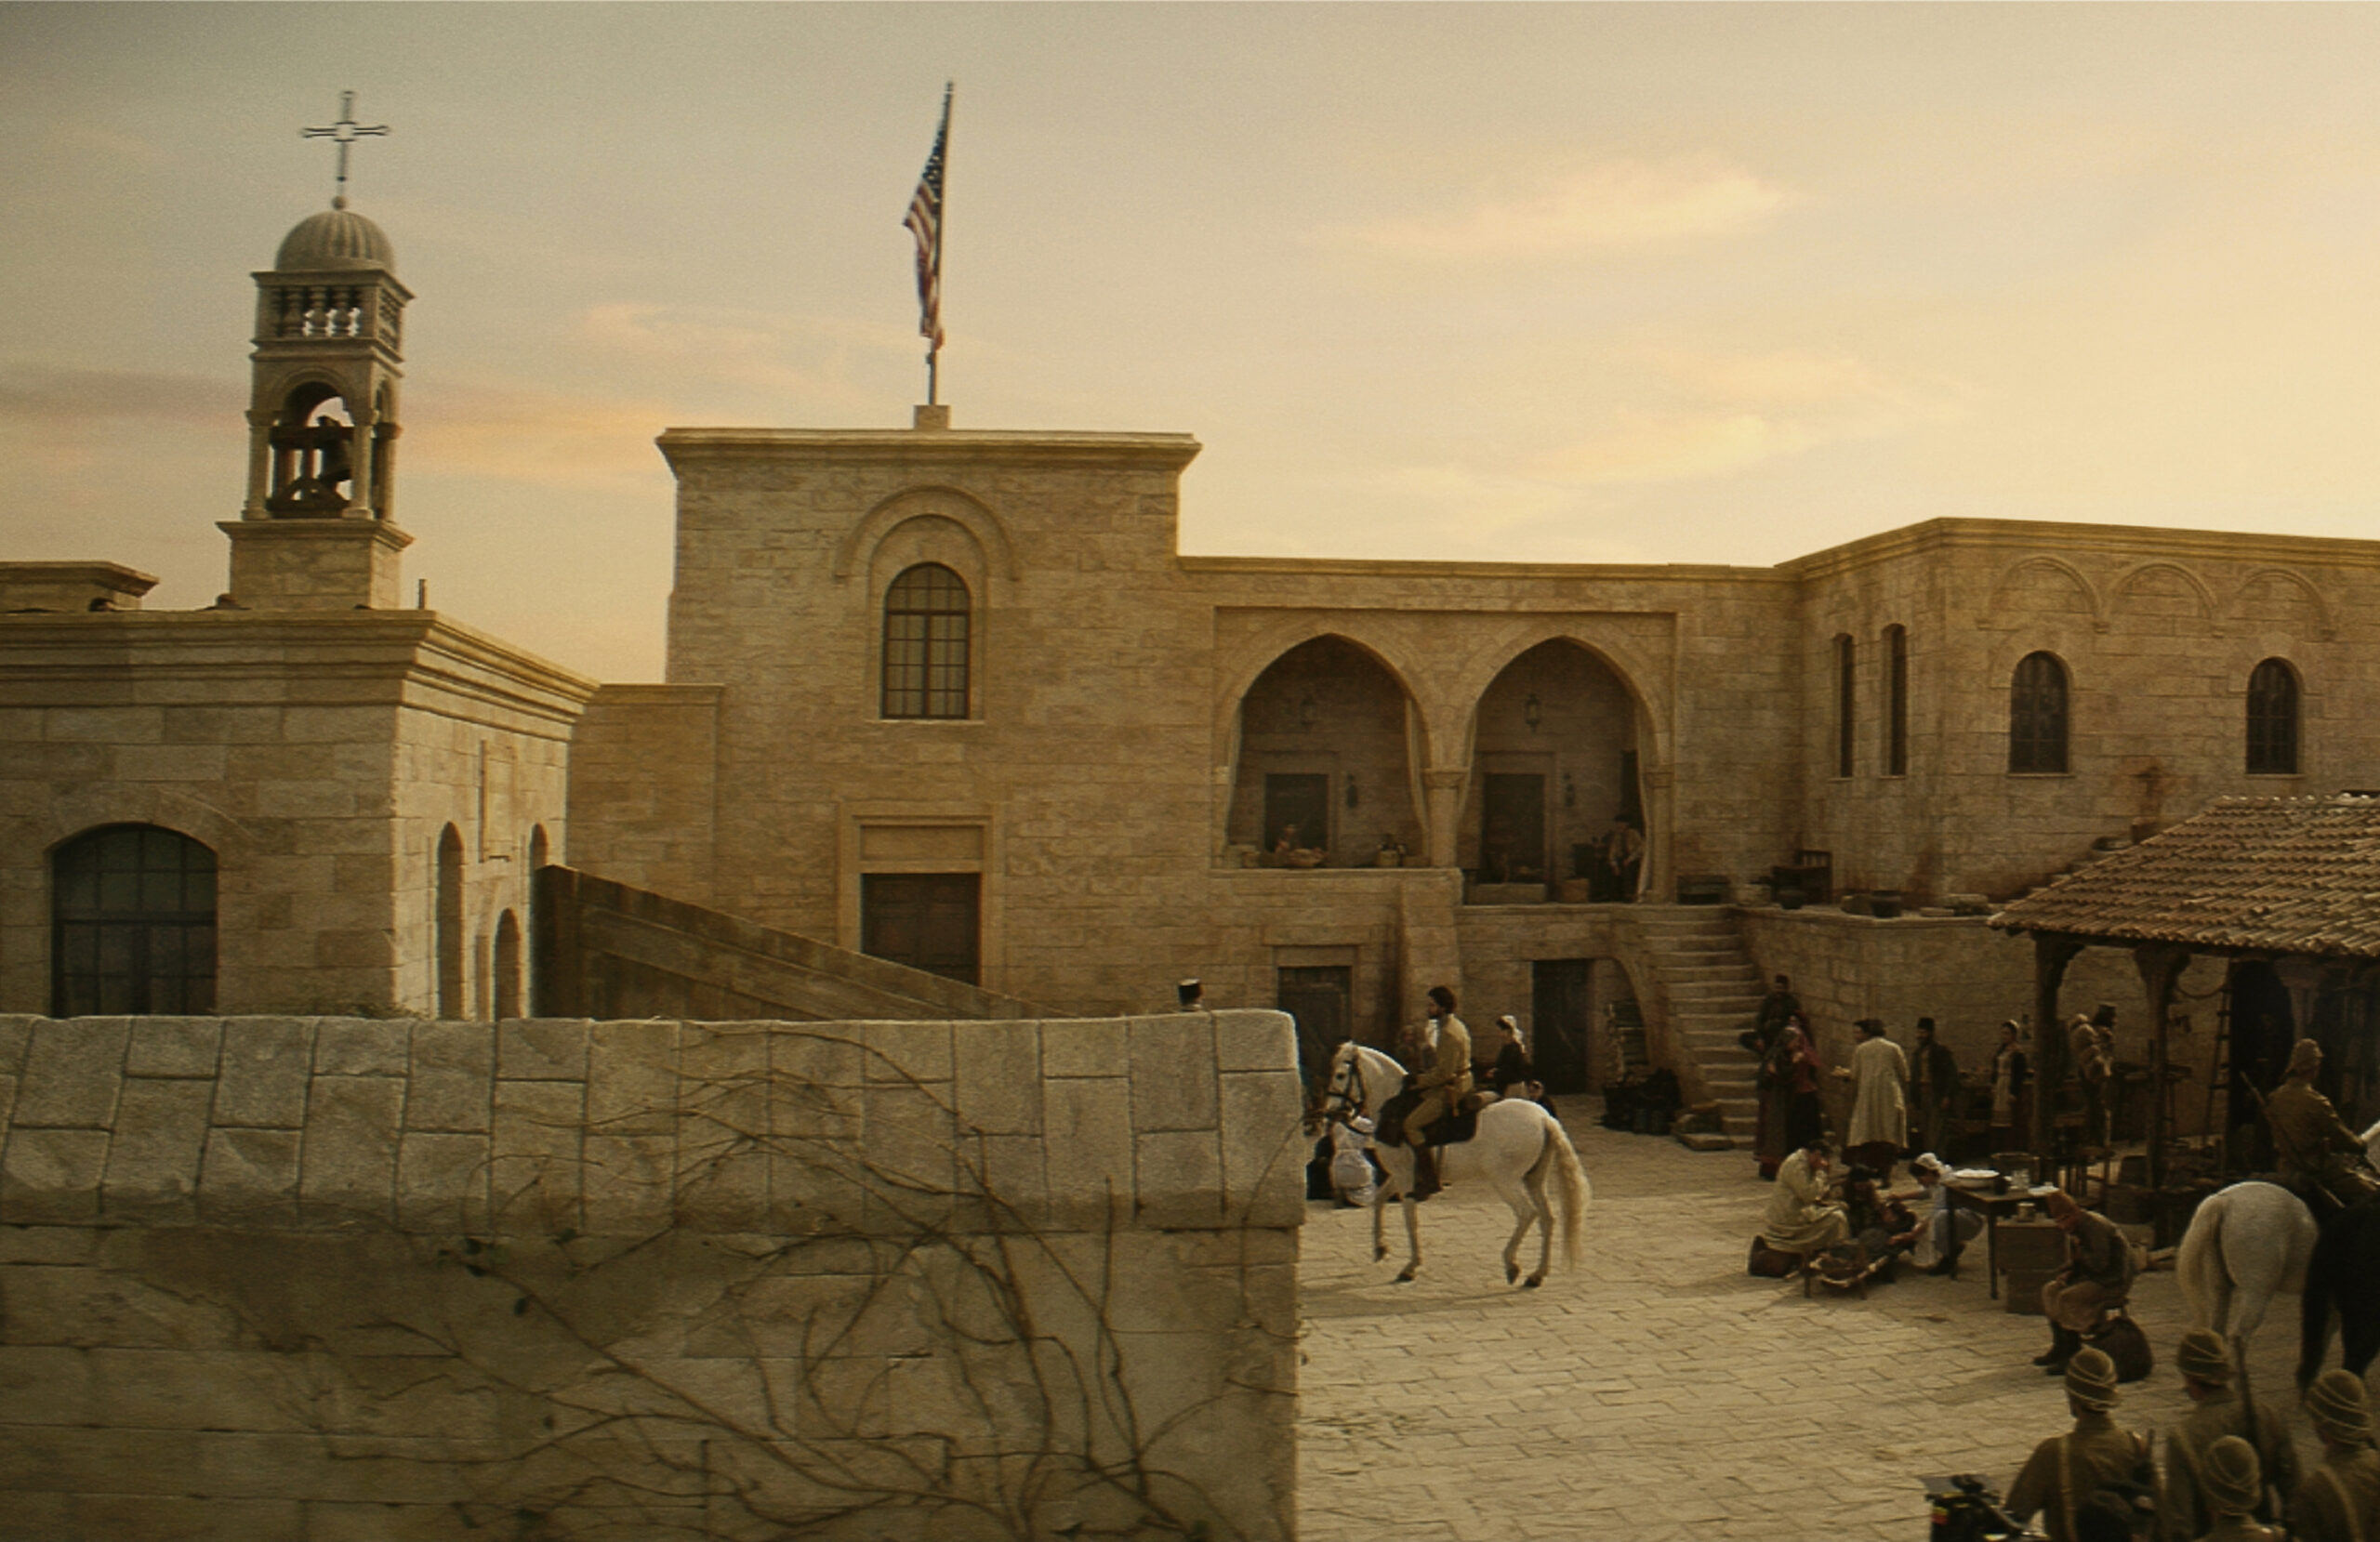 THE OTTOMAN LIEUTENANT - Directed by Joseph Ruben - Production Design by Luca Tranchino - Ext. Mission Hospital - ©2016 - Y Stone